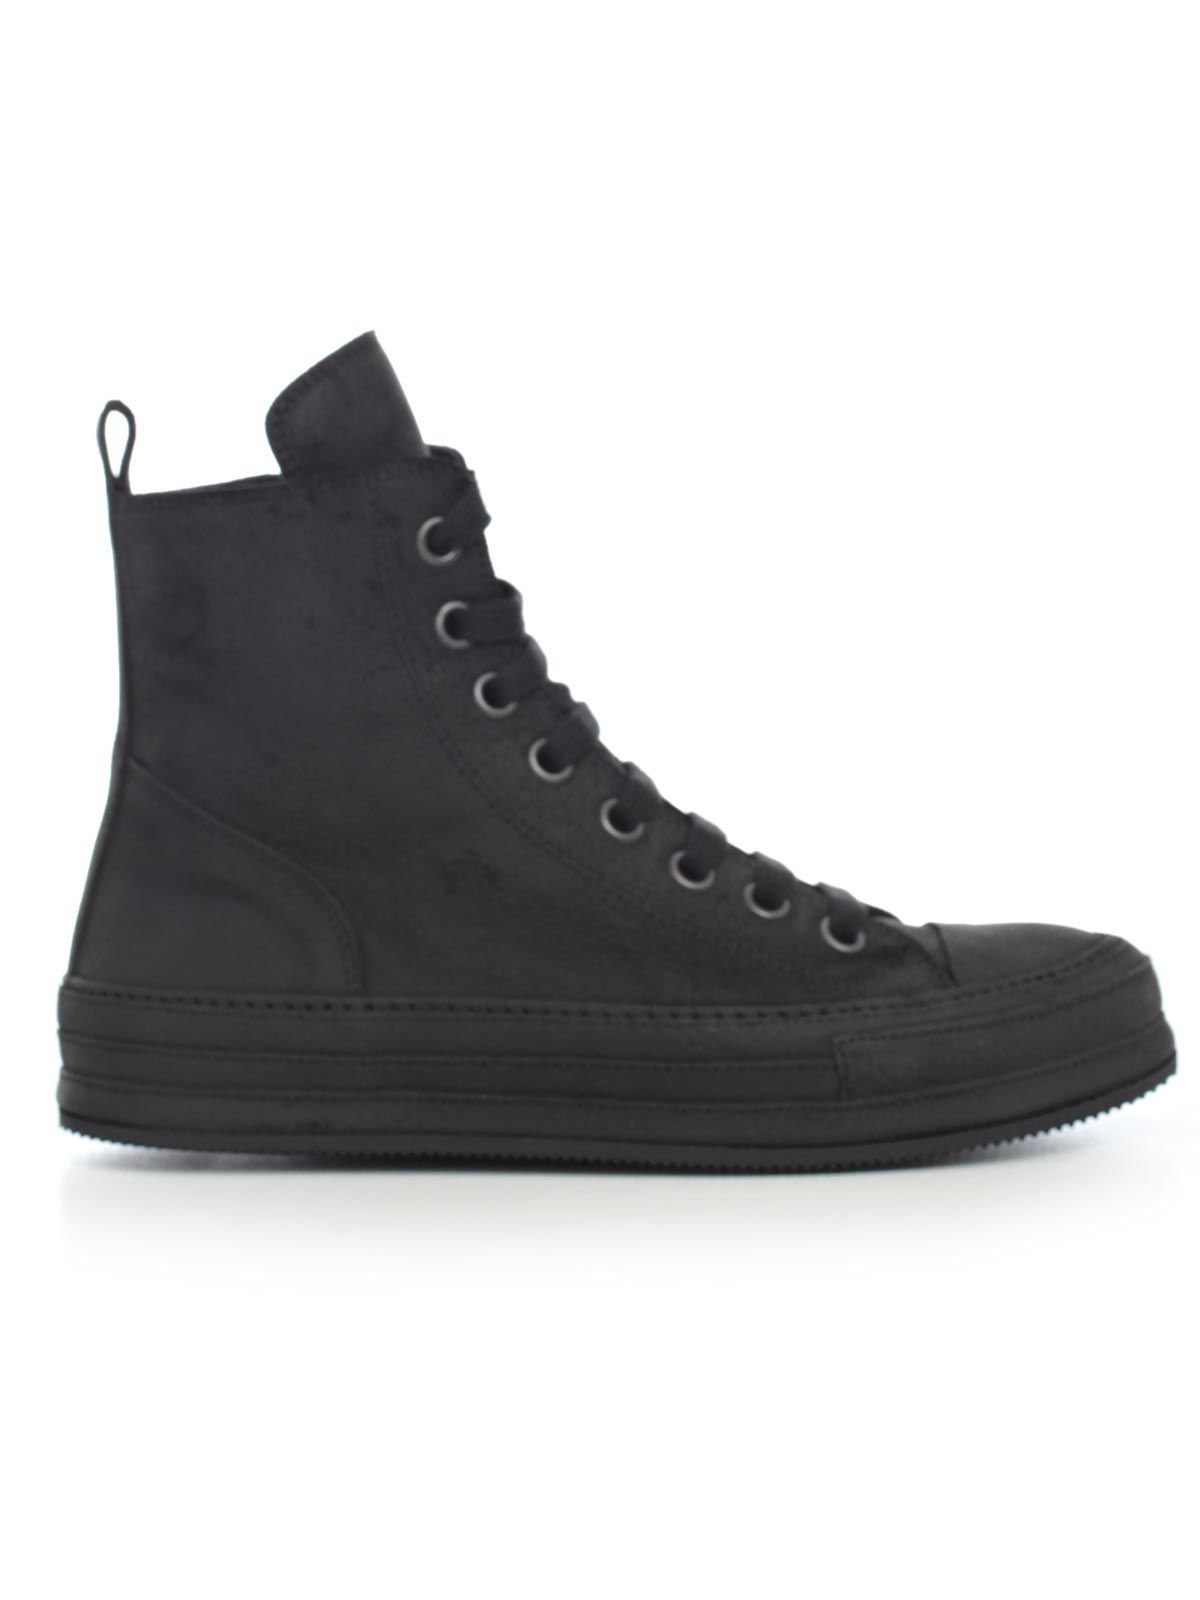 Ann Demeulemeester Leather Sneakers In Black | ModeSens